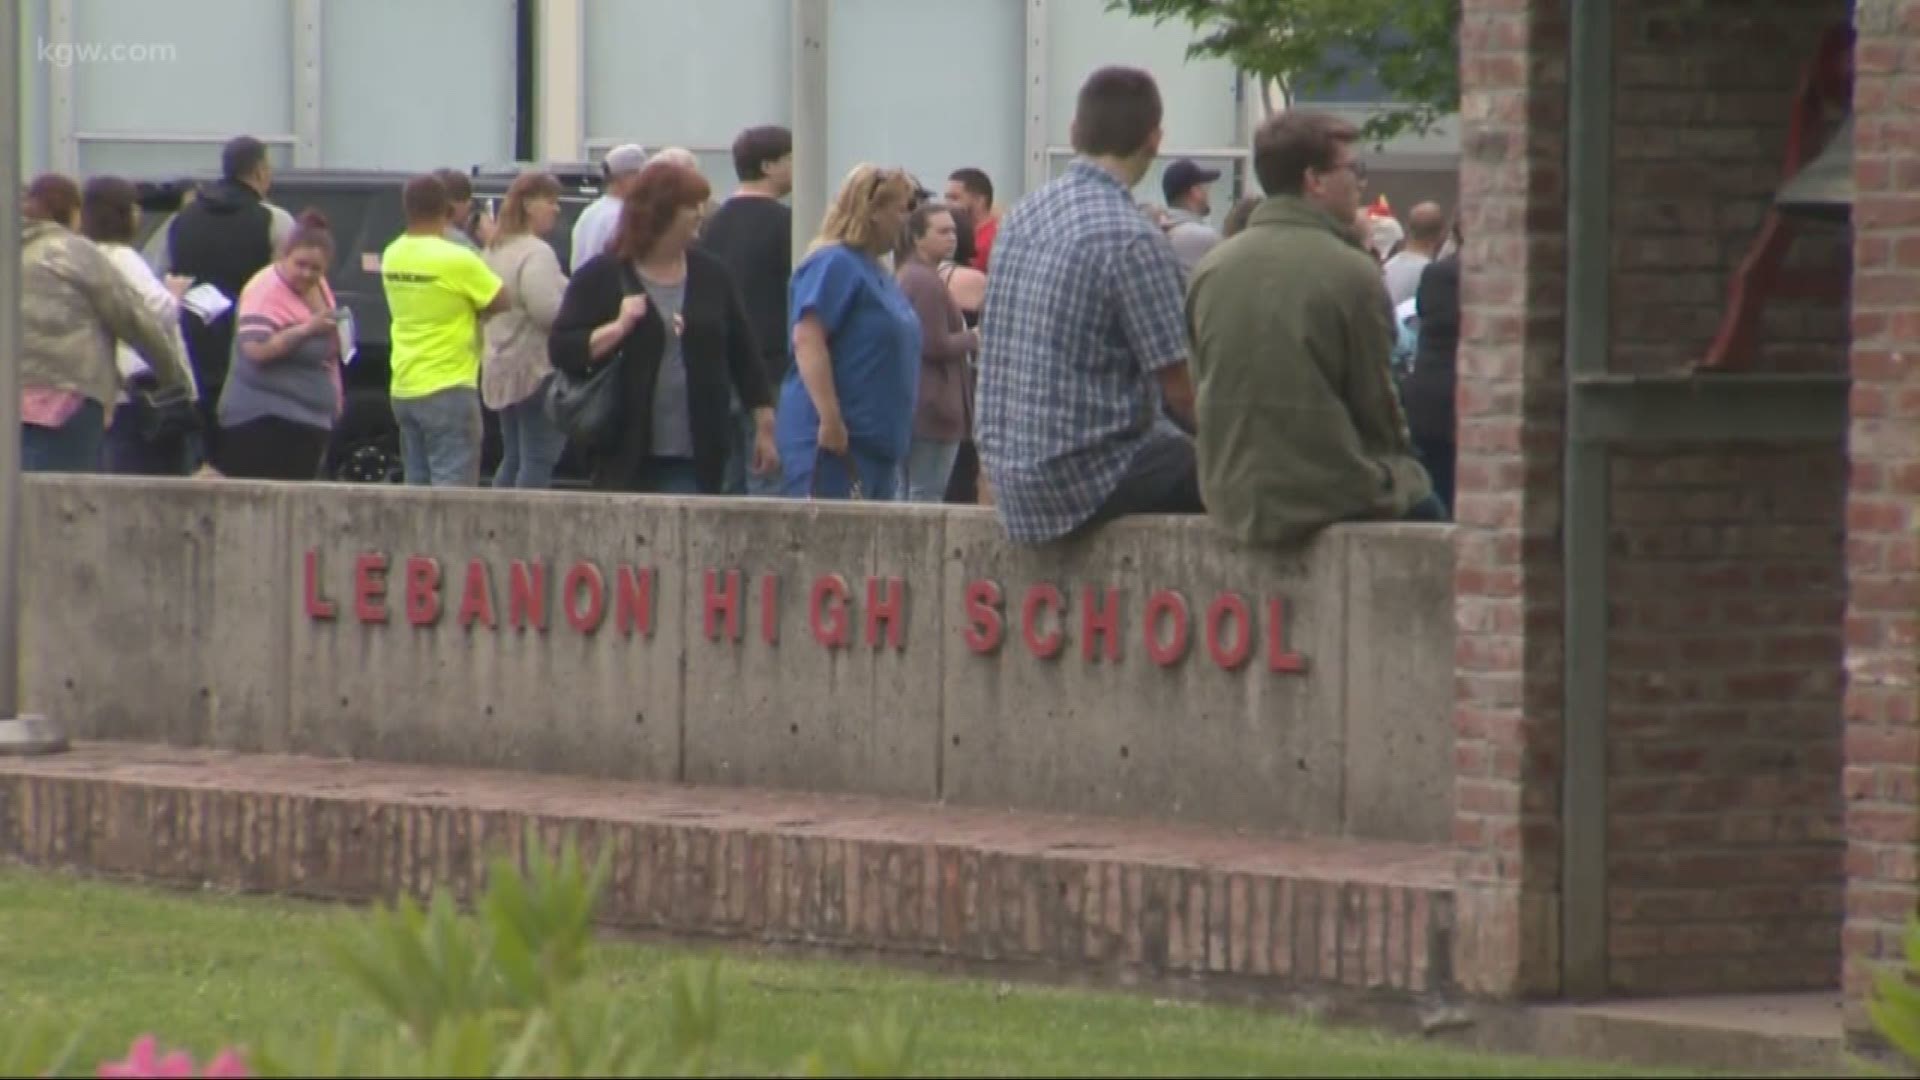 A student is in custody after bringing a gun to the school campus.